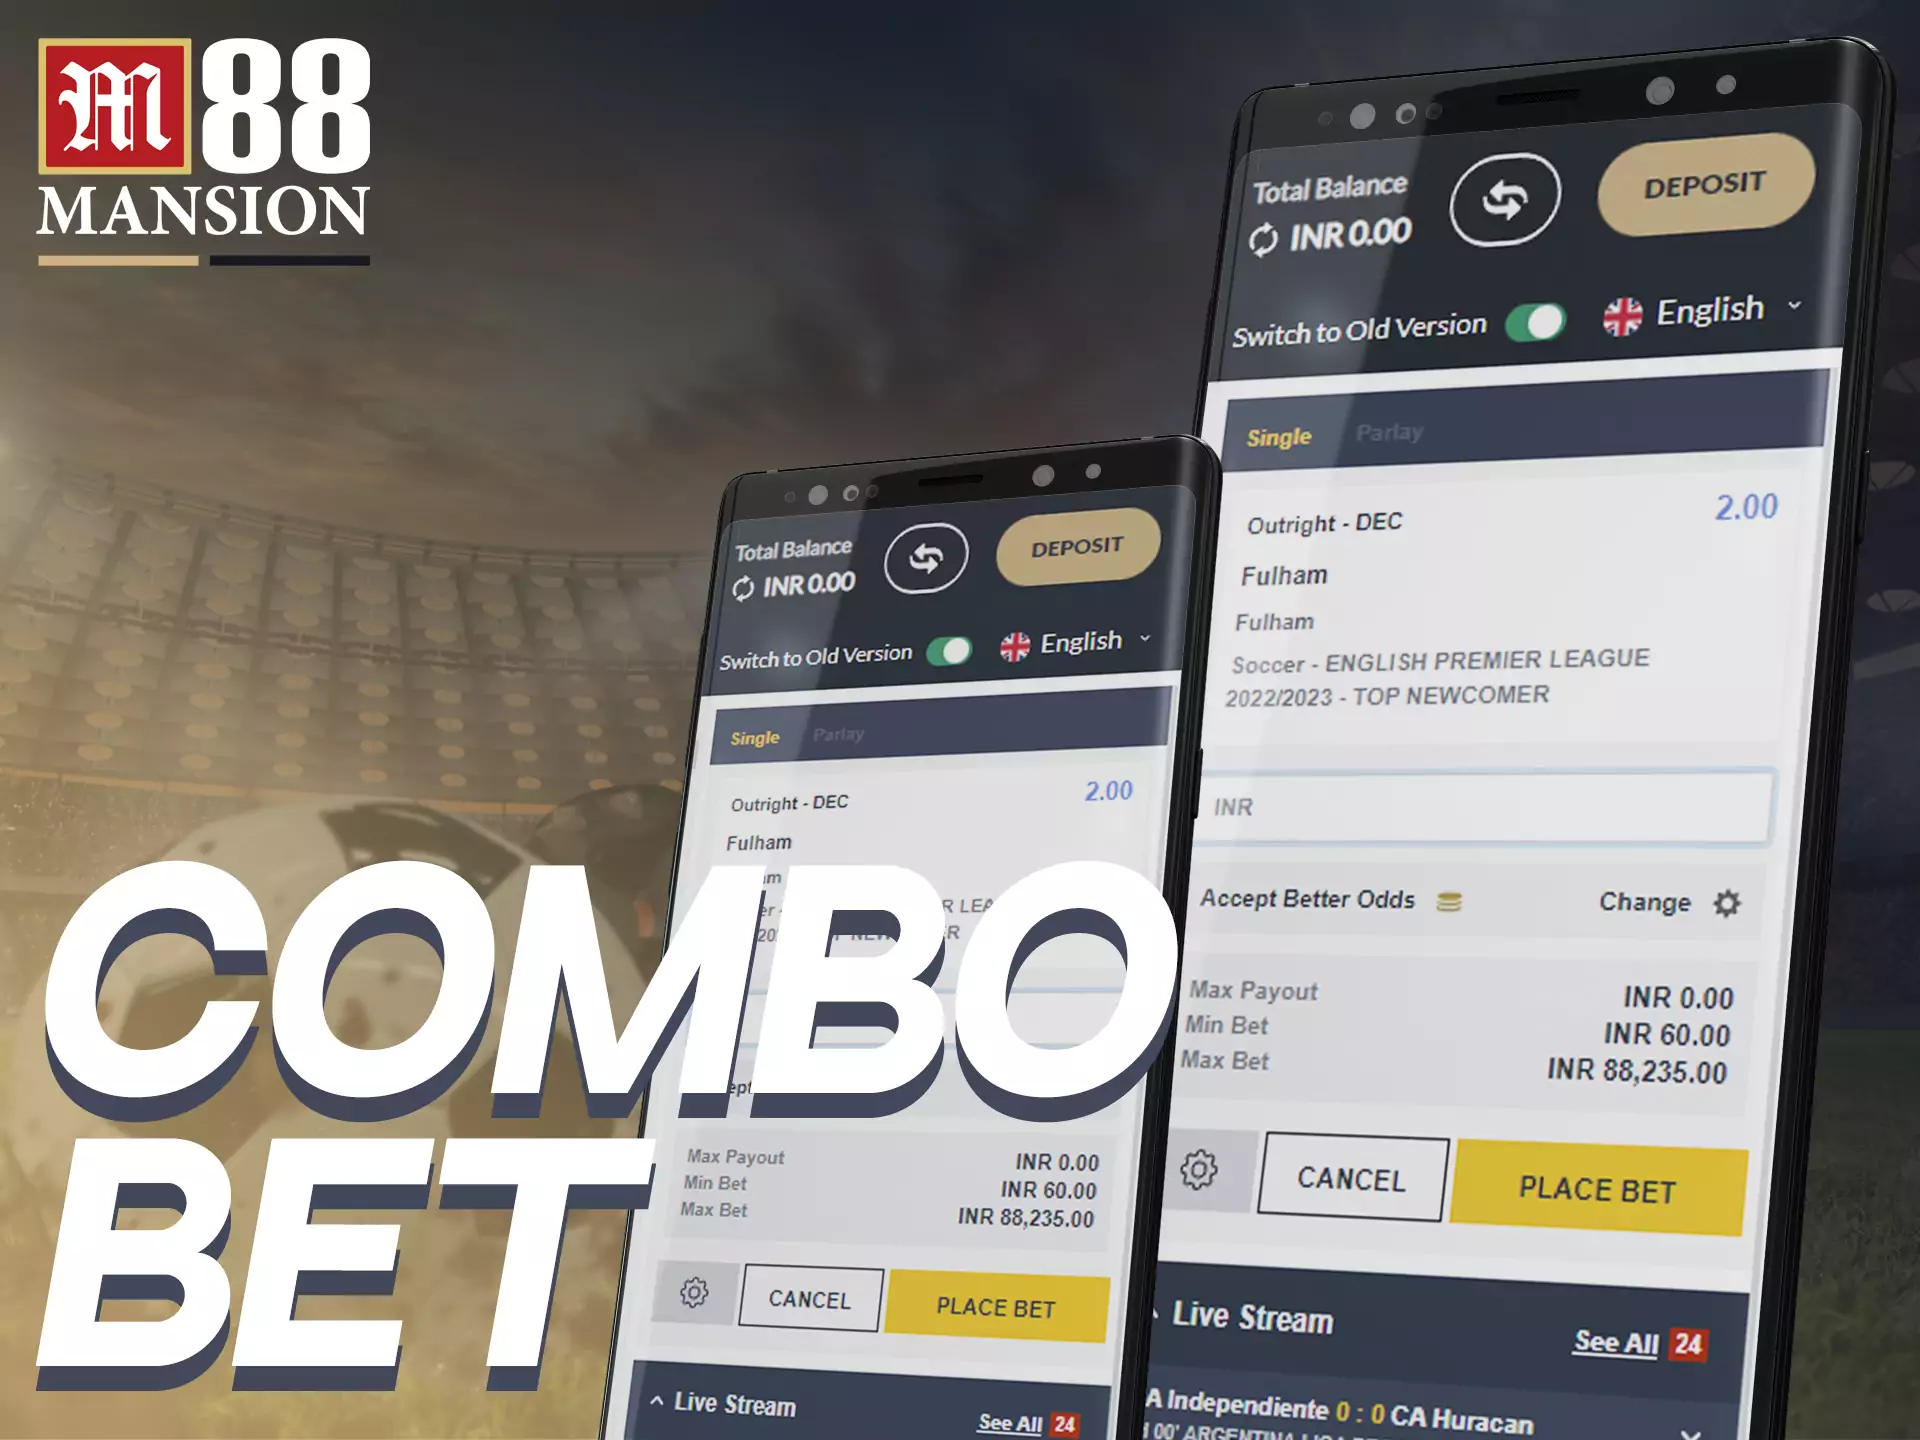 You can place two bets simultaneously in the bet constructor on M88.